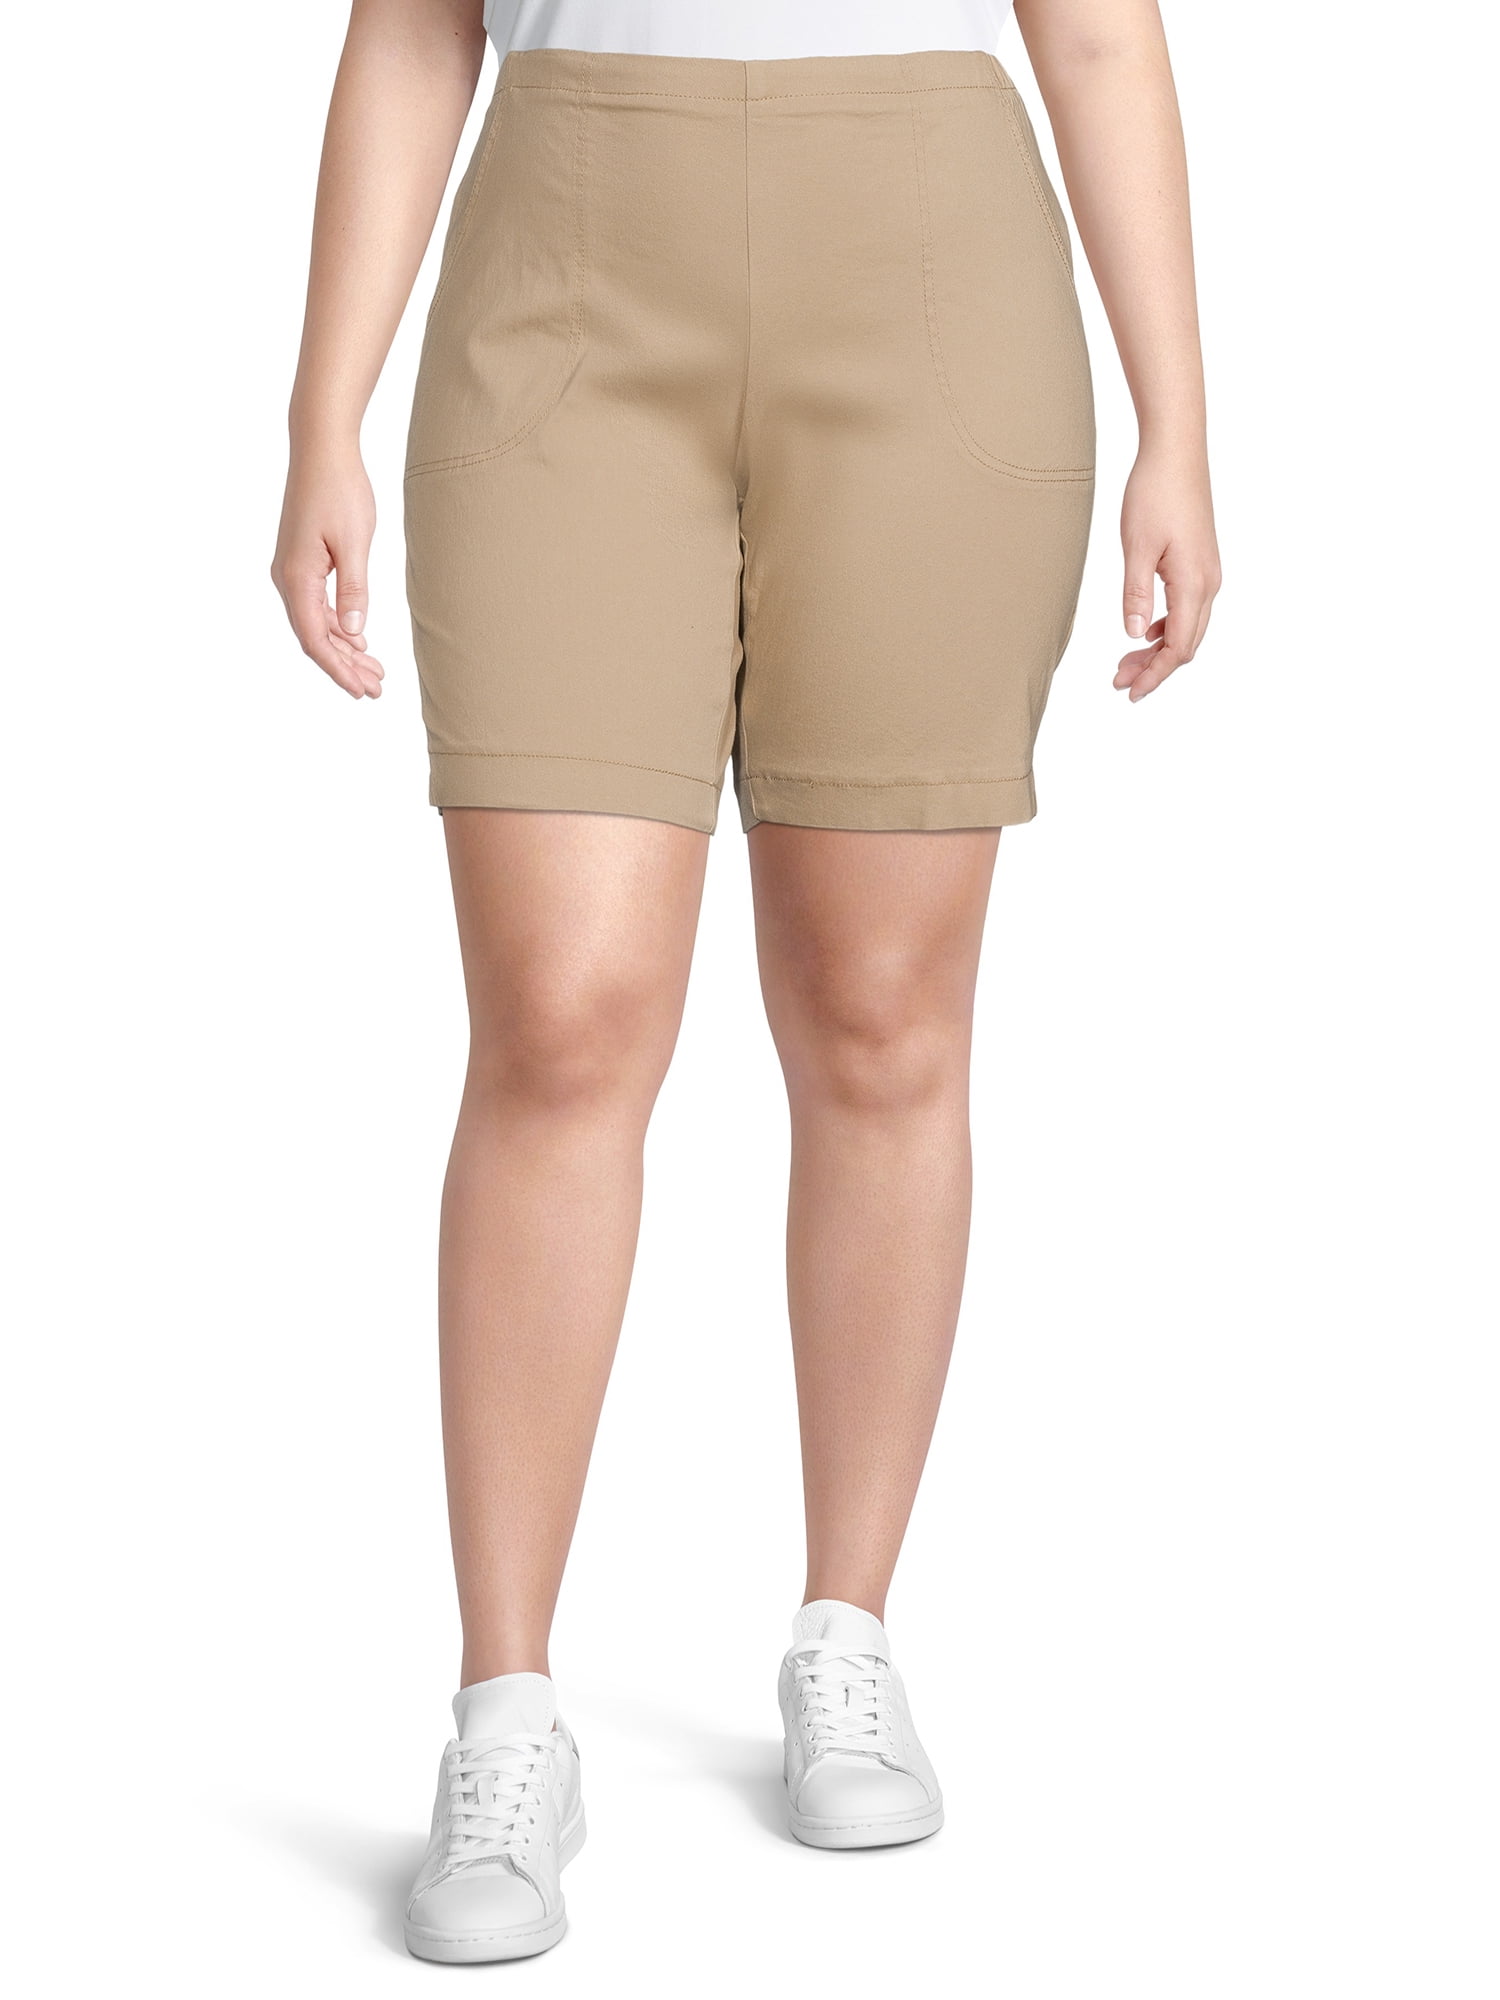 Women's Plus Size Peach Skin Biker Shorts. (6 Pack) • Peach Skin • Short  leg design • Comfortable and easy pull-up style • Solid color, Very  Stretchy • Fits like a Glove •